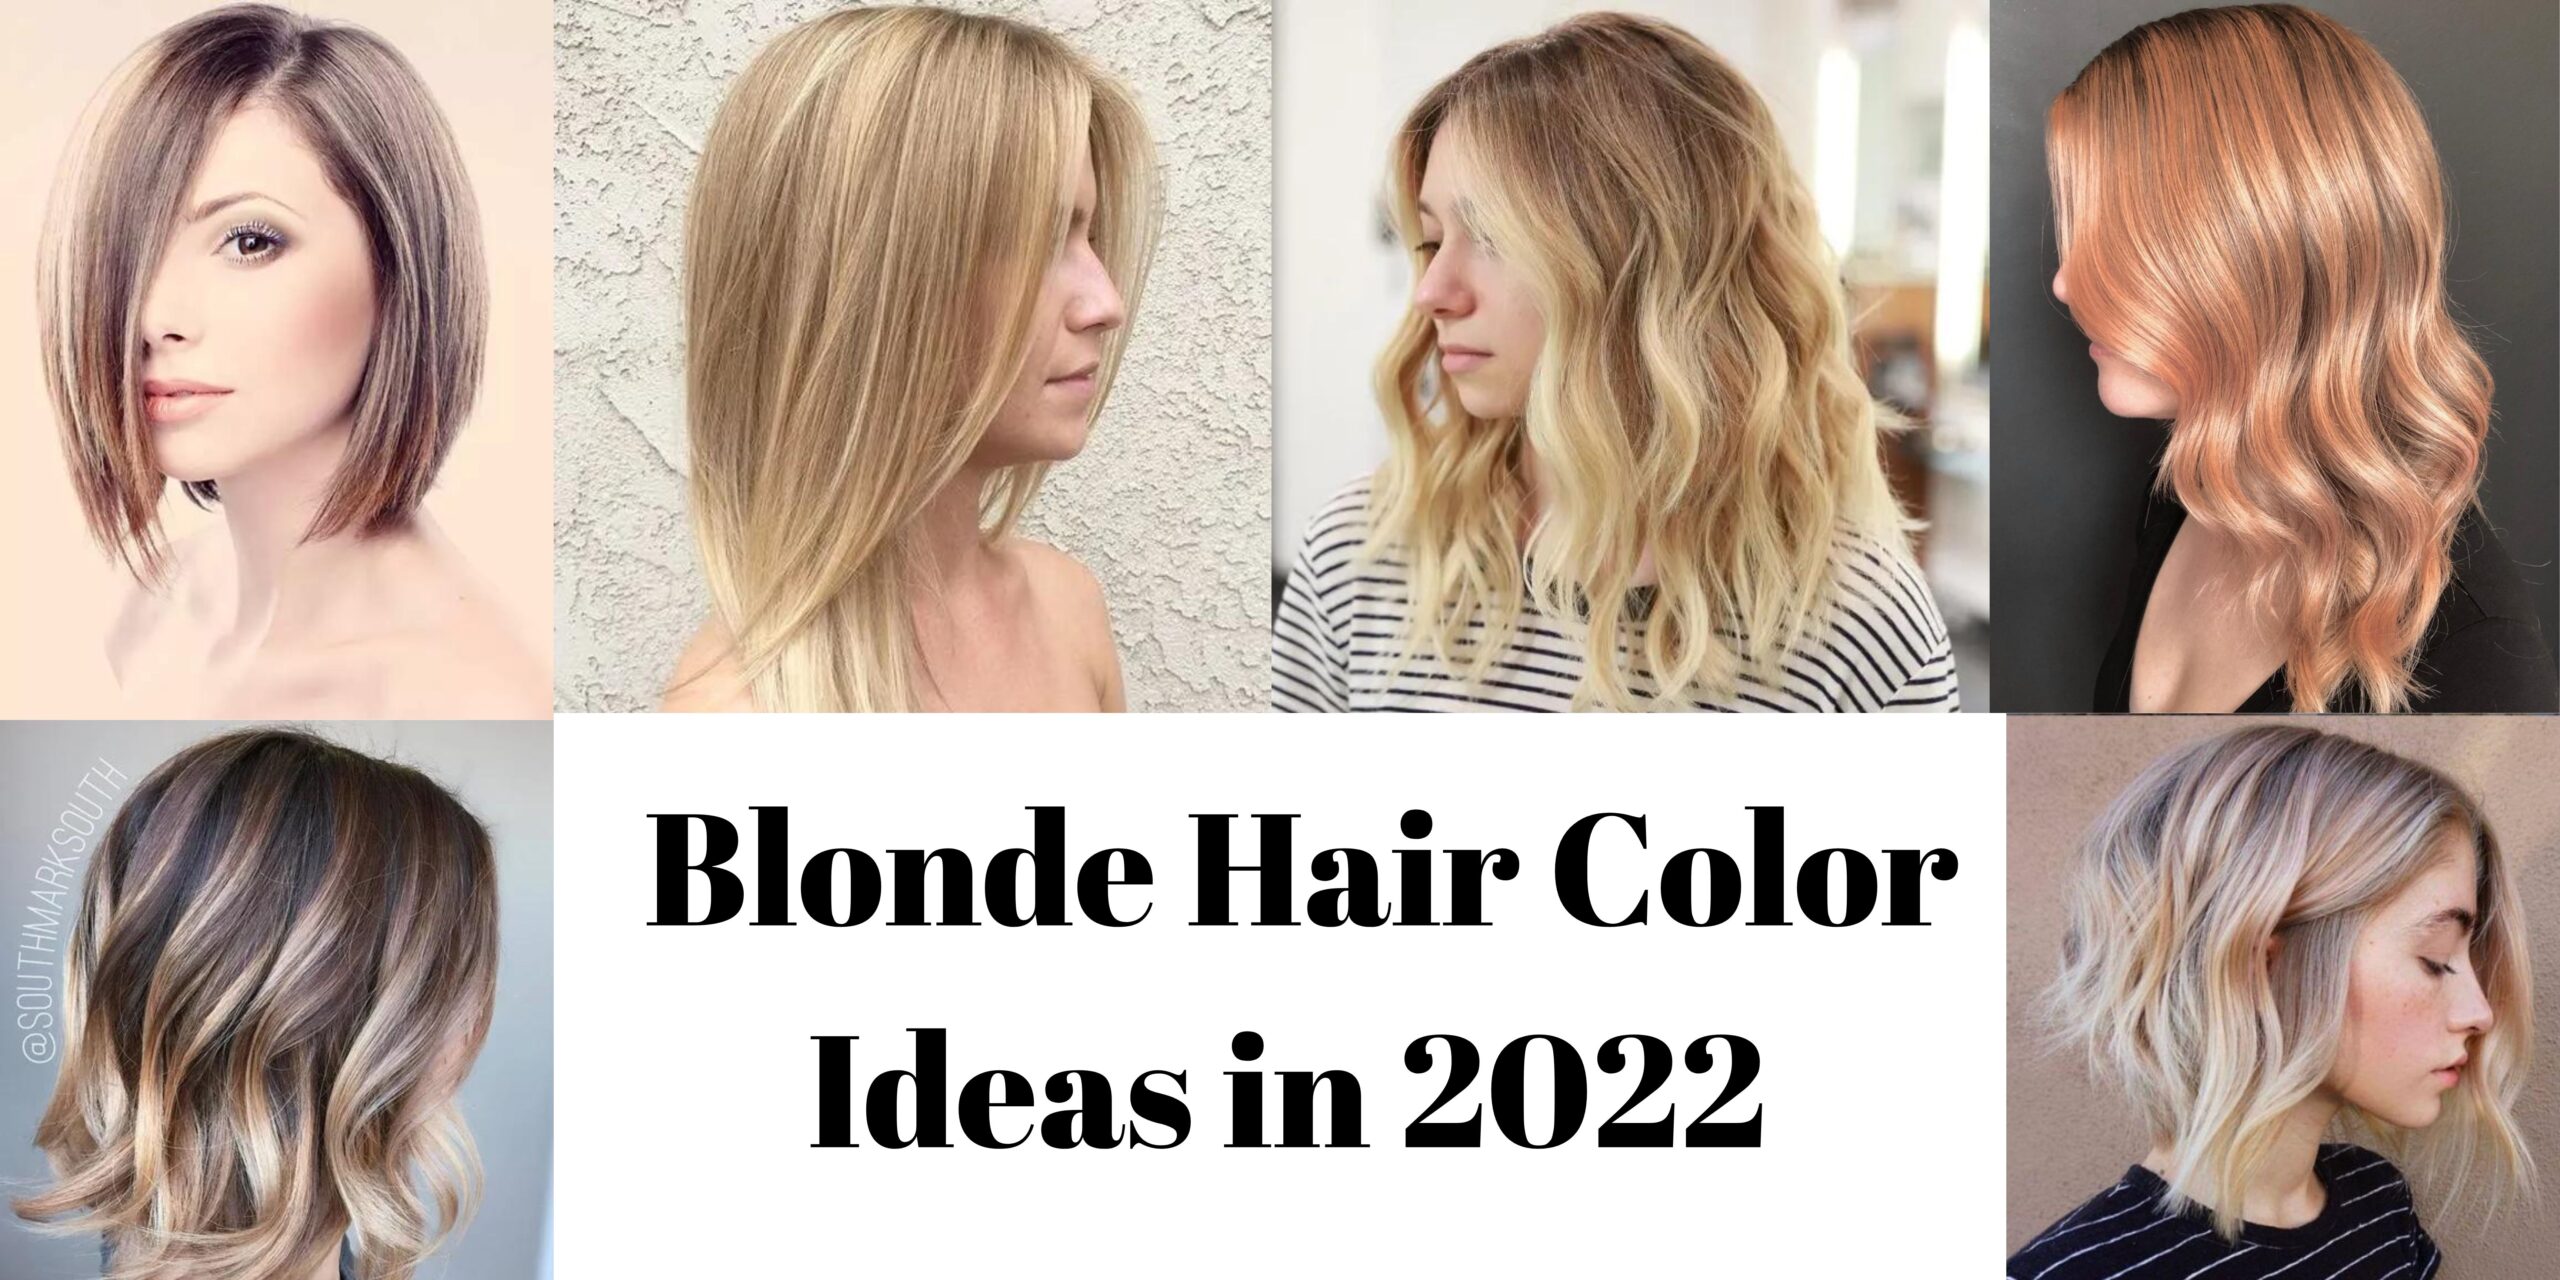 23 Blonde Hair Color Ideas in 2023